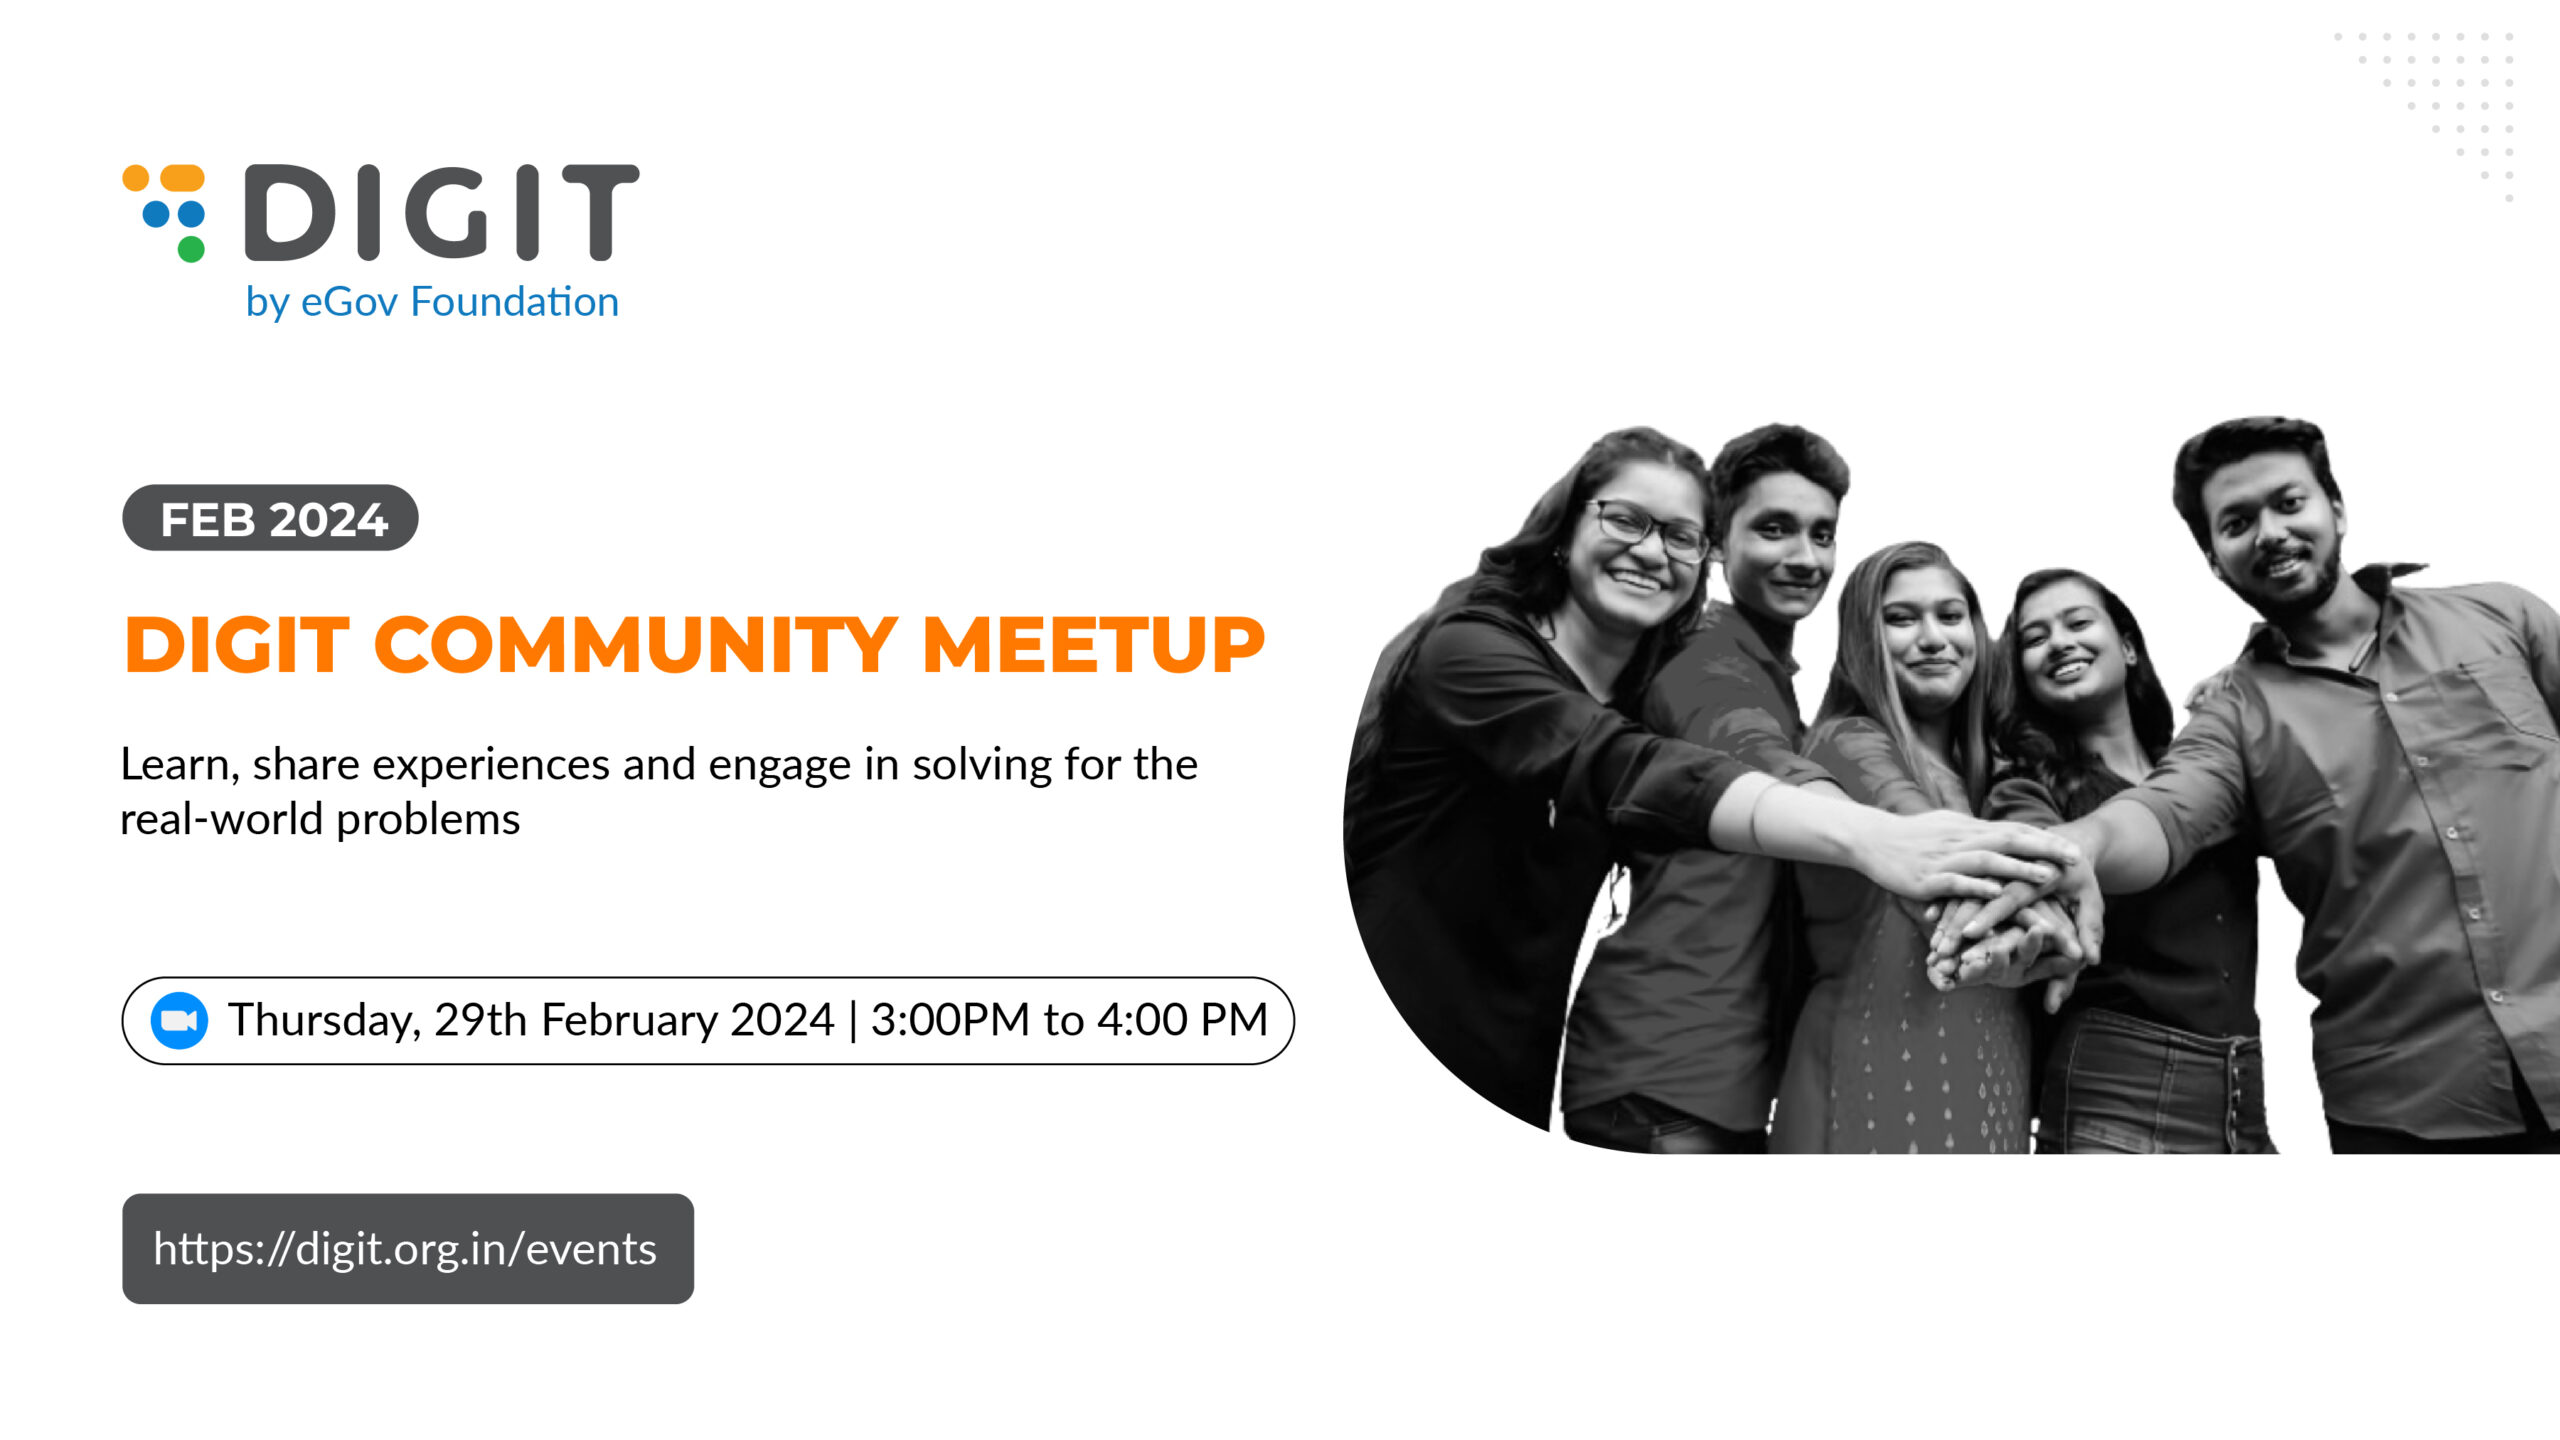 Calling all innovators to the DIGIT Community Meetup